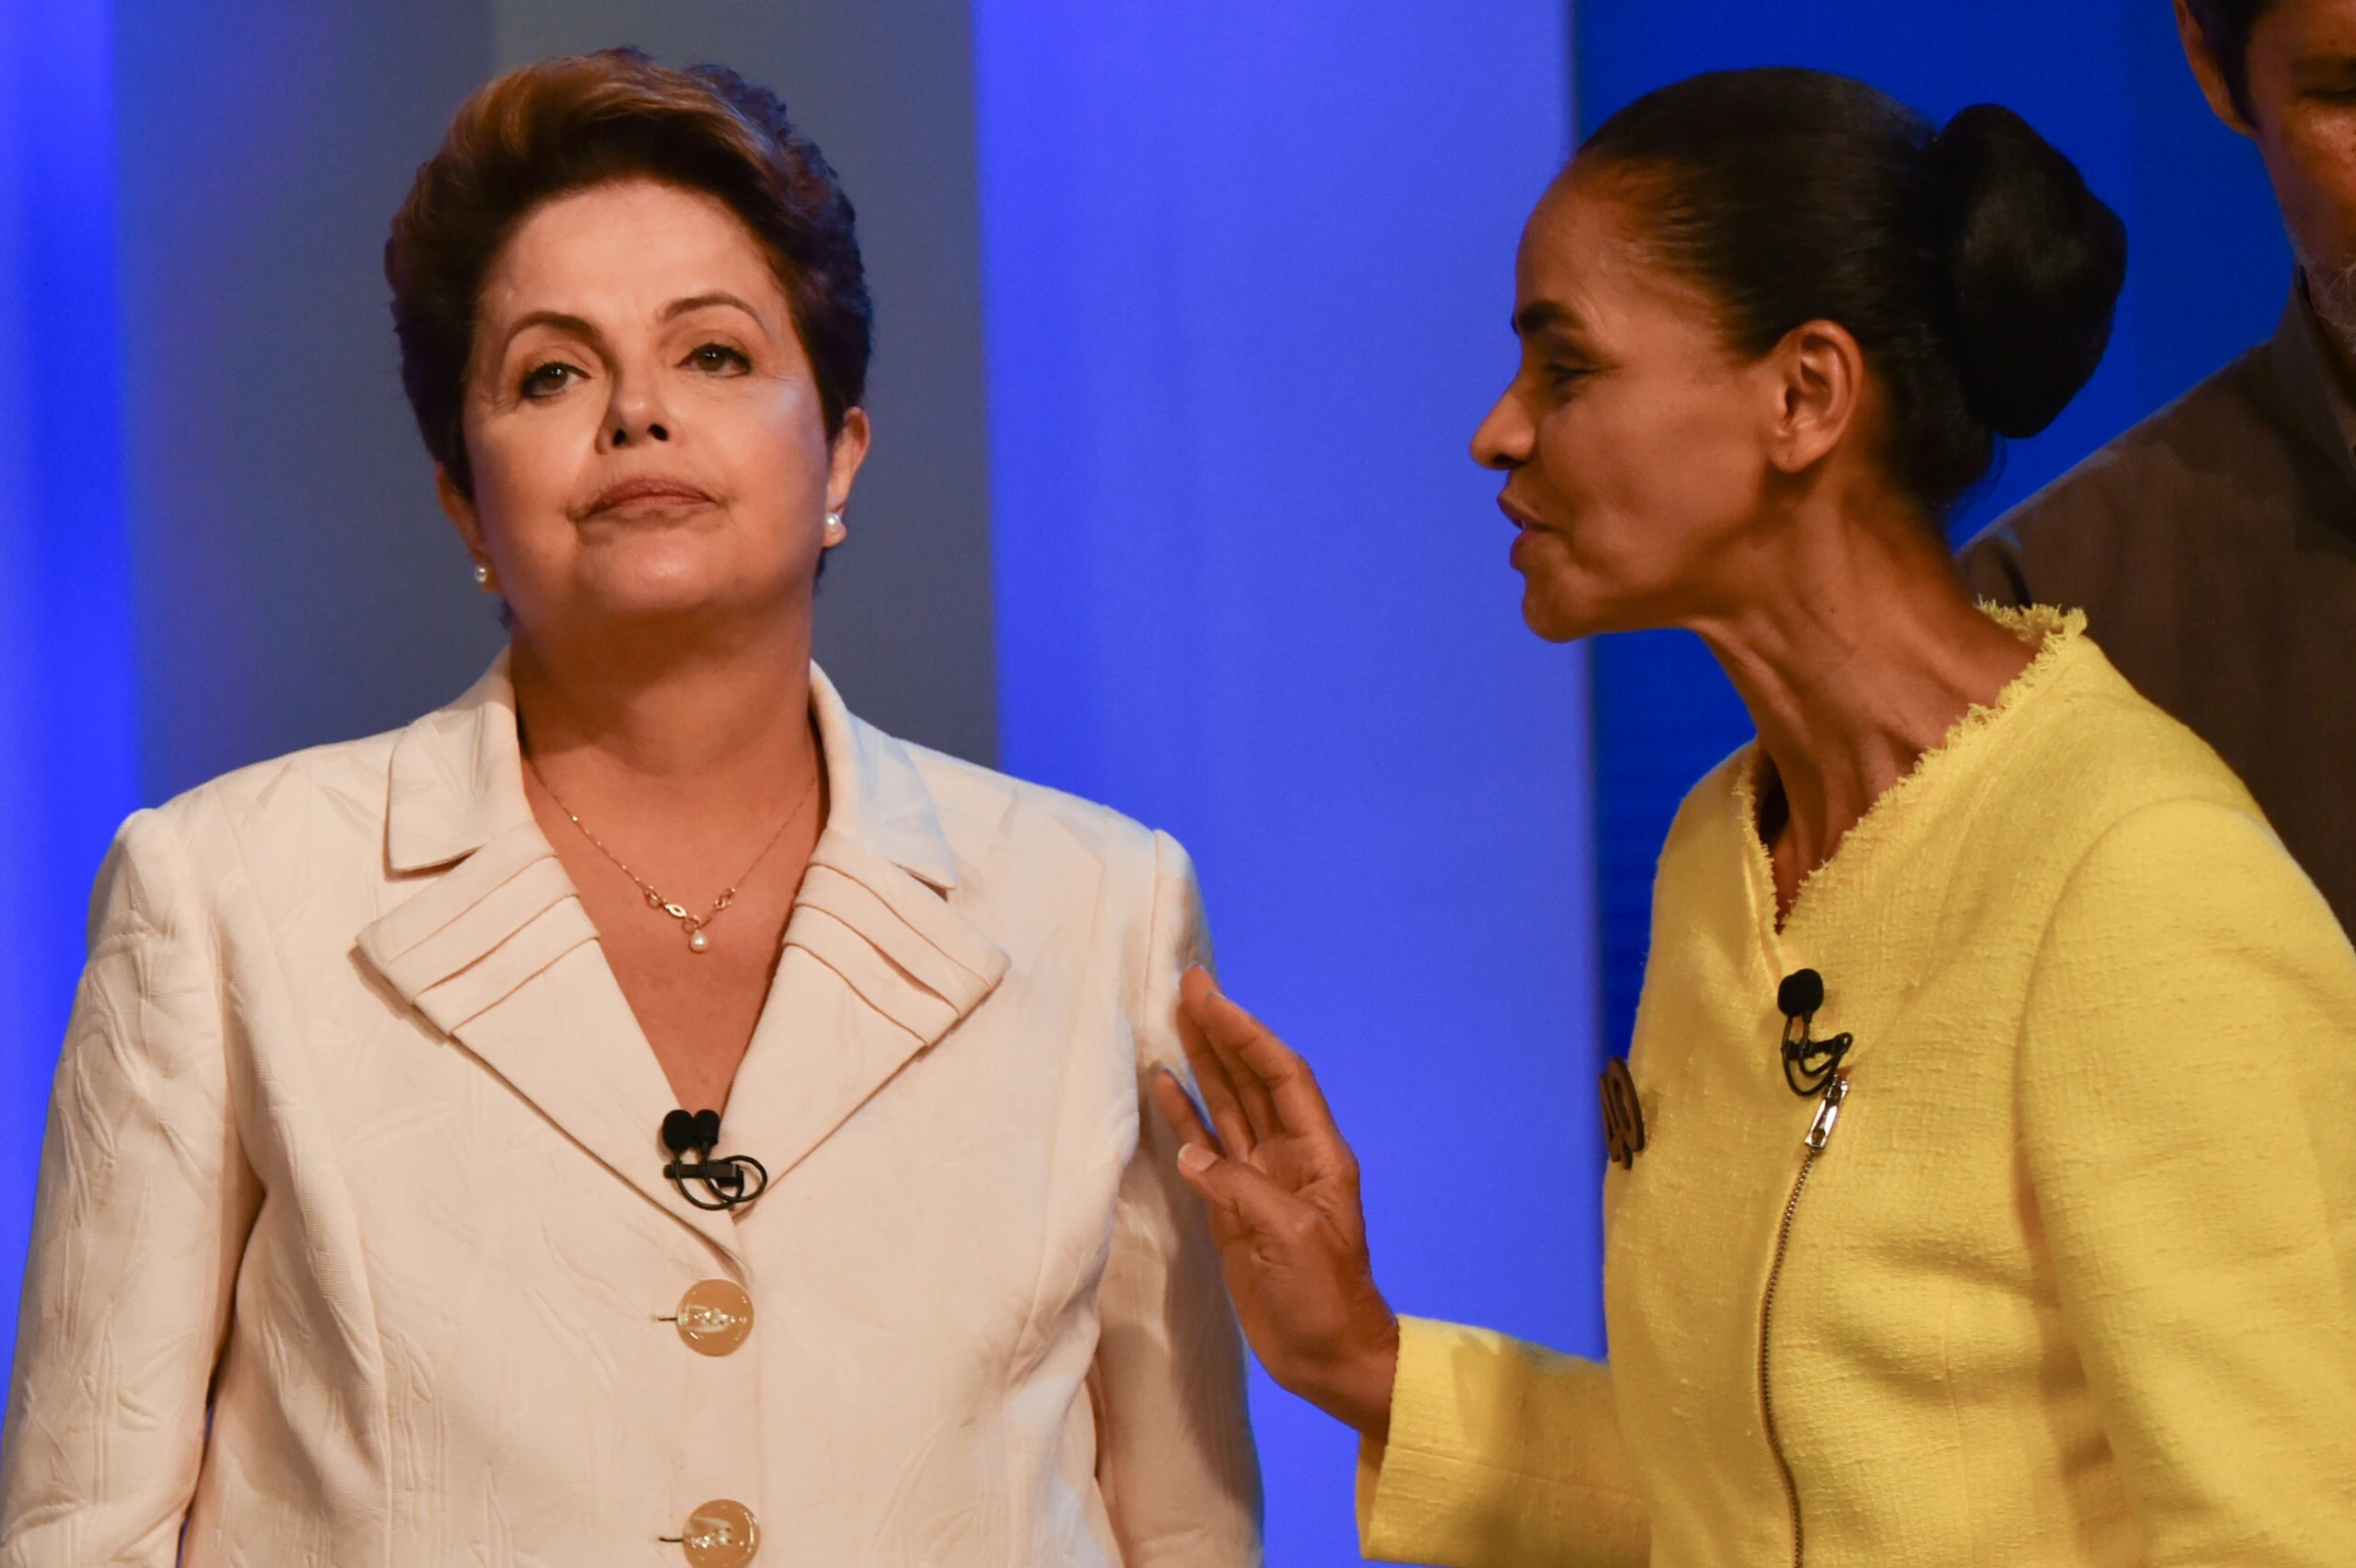 Brazilian President and candidate of Brazilian presidential election for the Workers Party (PT) Dilma Rousseff (L) and Marina Silva, a candidate for the Brazilian Socialist Party (PSB), attend their last TV debate in Rio de Janeiro, Brazil, on October 2, 2014. The general election will be held on October 5, 2014.  AFP PHOTO / YASUYOSHI CHIBA        (Photo credit should read YASUYOSHI CHIBA/AFP/Getty Images)